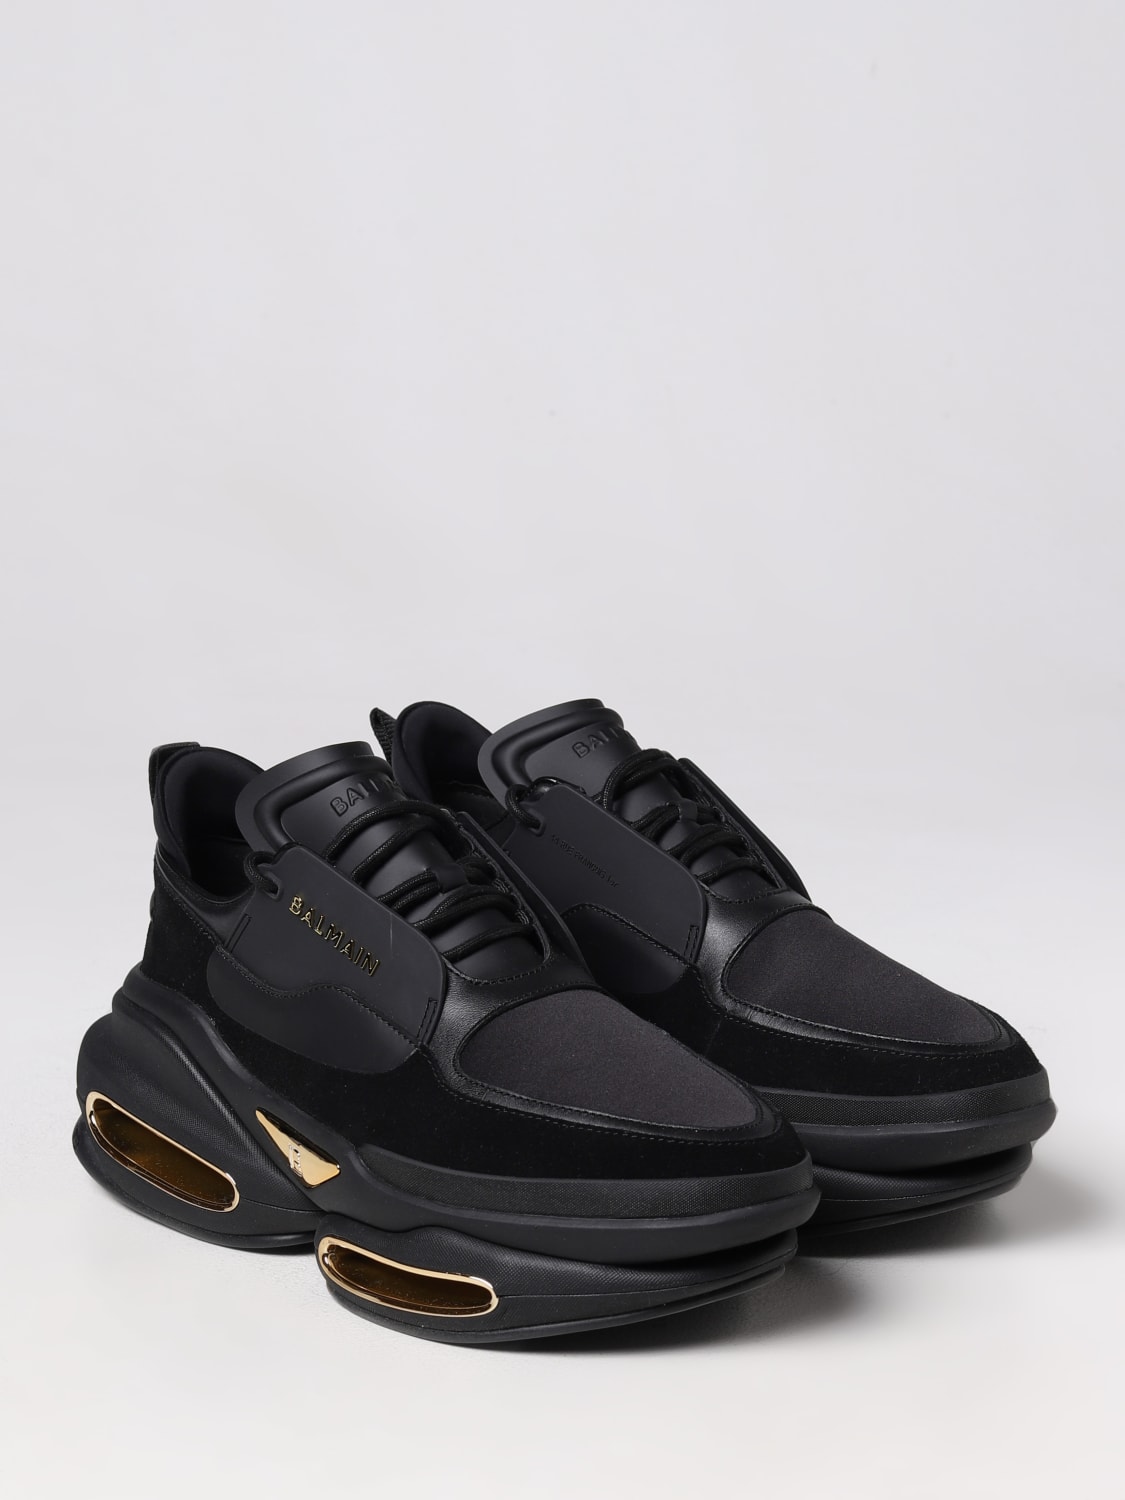 BALMAIN: B-Bold sneakers in leather and fabric - Black | Balmain AM0VI277LSSE online on GIGLIO.COM